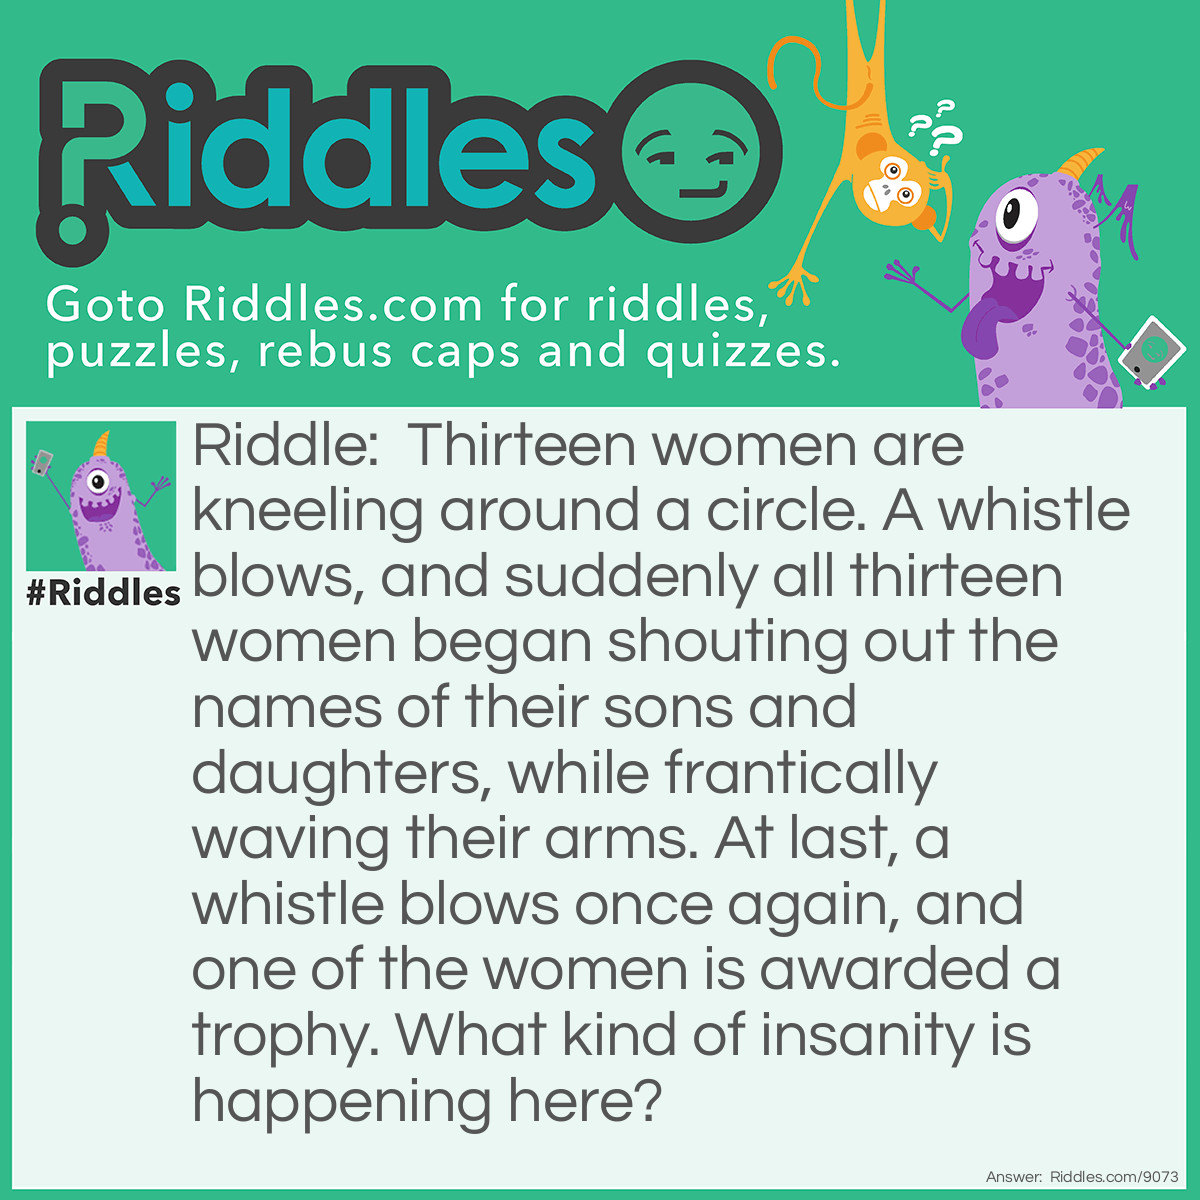 Riddle: Thirteen women are kneeling around a circle. A whistle blows, and suddenly all thirteen women began shouting out the names of their sons and daughters, while frantically waving their arms. At last, a whistle blows once again, and one of the women is awarded a trophy. What kind of insanity is happening here? Answer: The thirteen women, along with their thirteen sons and daughters (all babies of a crawling age), are competing in a "Fastest Crawling Baby Contest." Initially, all of the babies were placed in the center of a circle, with the women kneeling outside of that circle. When the whistle blew, the first baby to crawl to their mother outside of the circle was the winner, and the trophy was subsequently awarded to her.